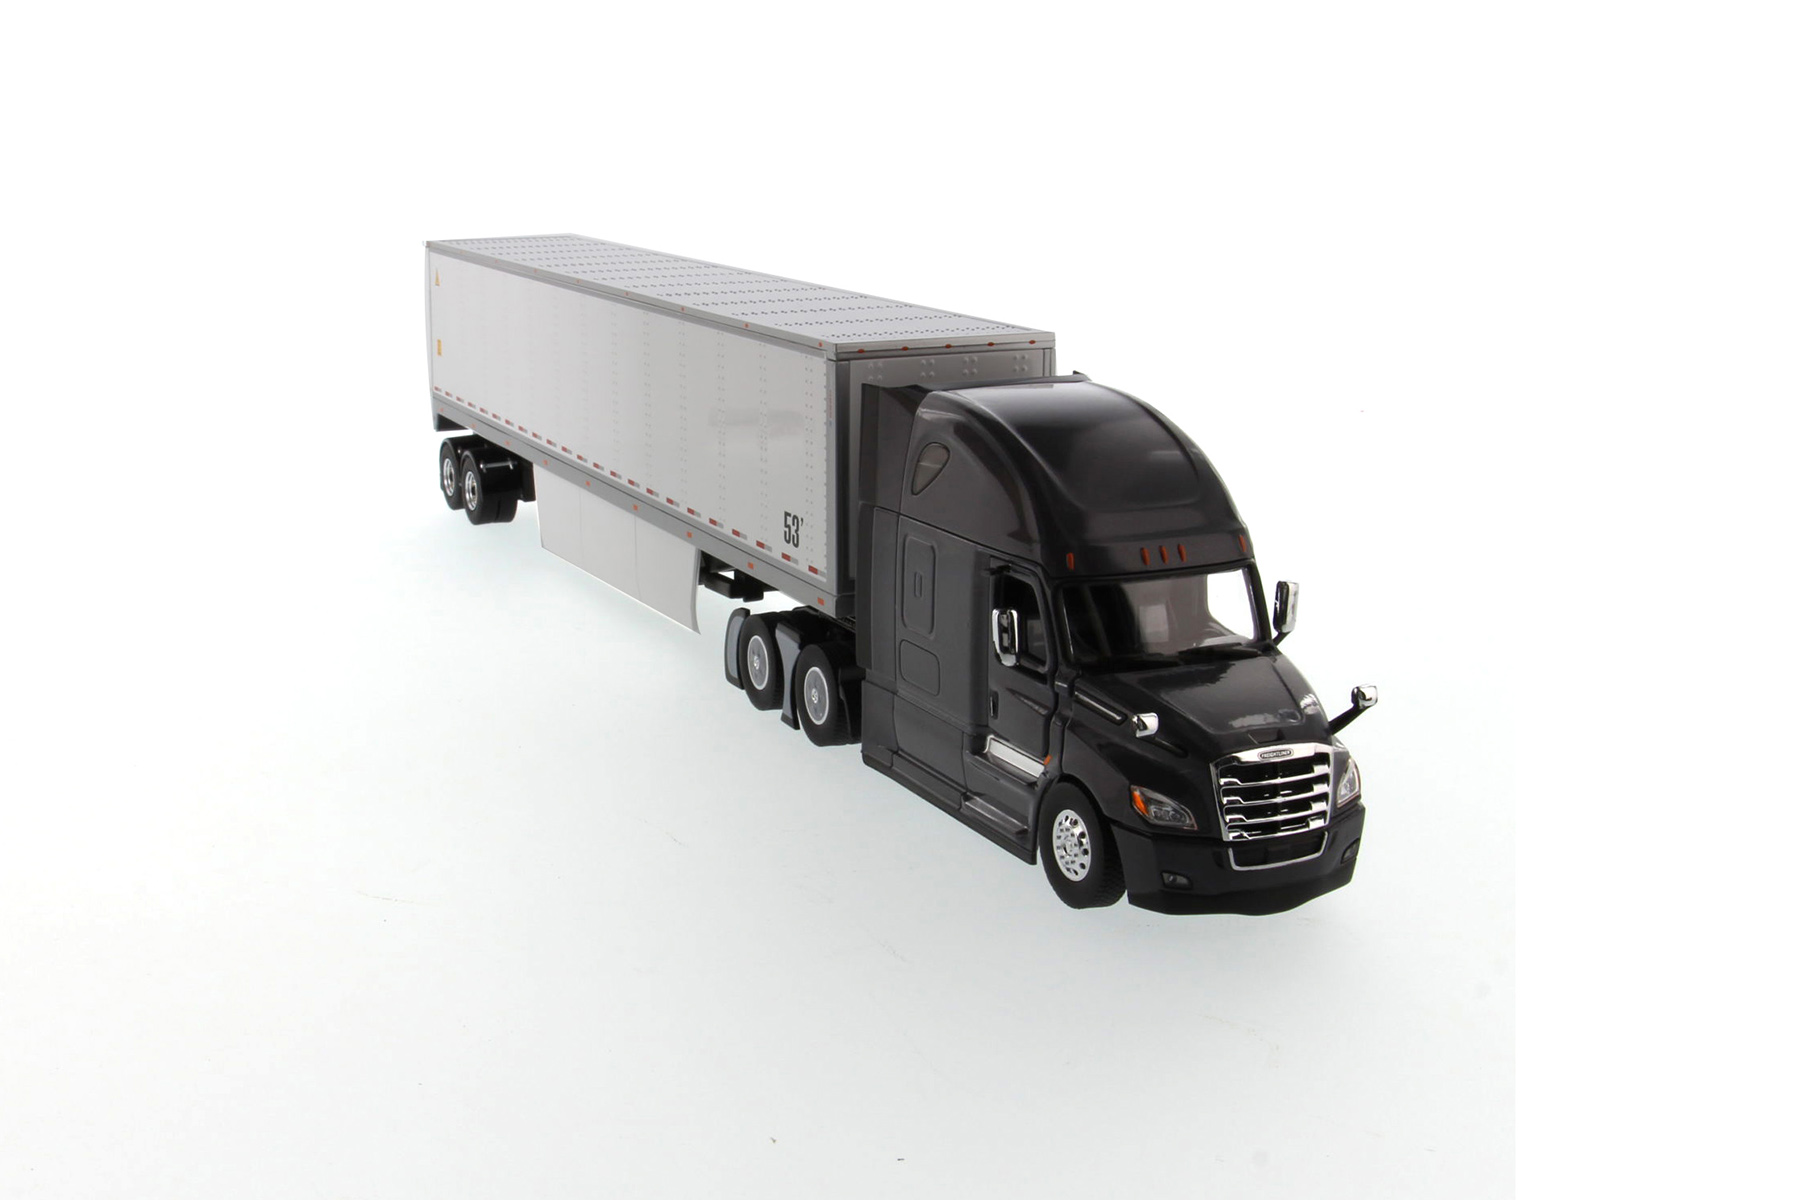 Freightliner New Cascadia SBFA Sleeper Cab Truck Tractor with Dry Cargo  Van, Black and White - Diecast Masters 71047 - 1/50 scale Diecast Model Toy 